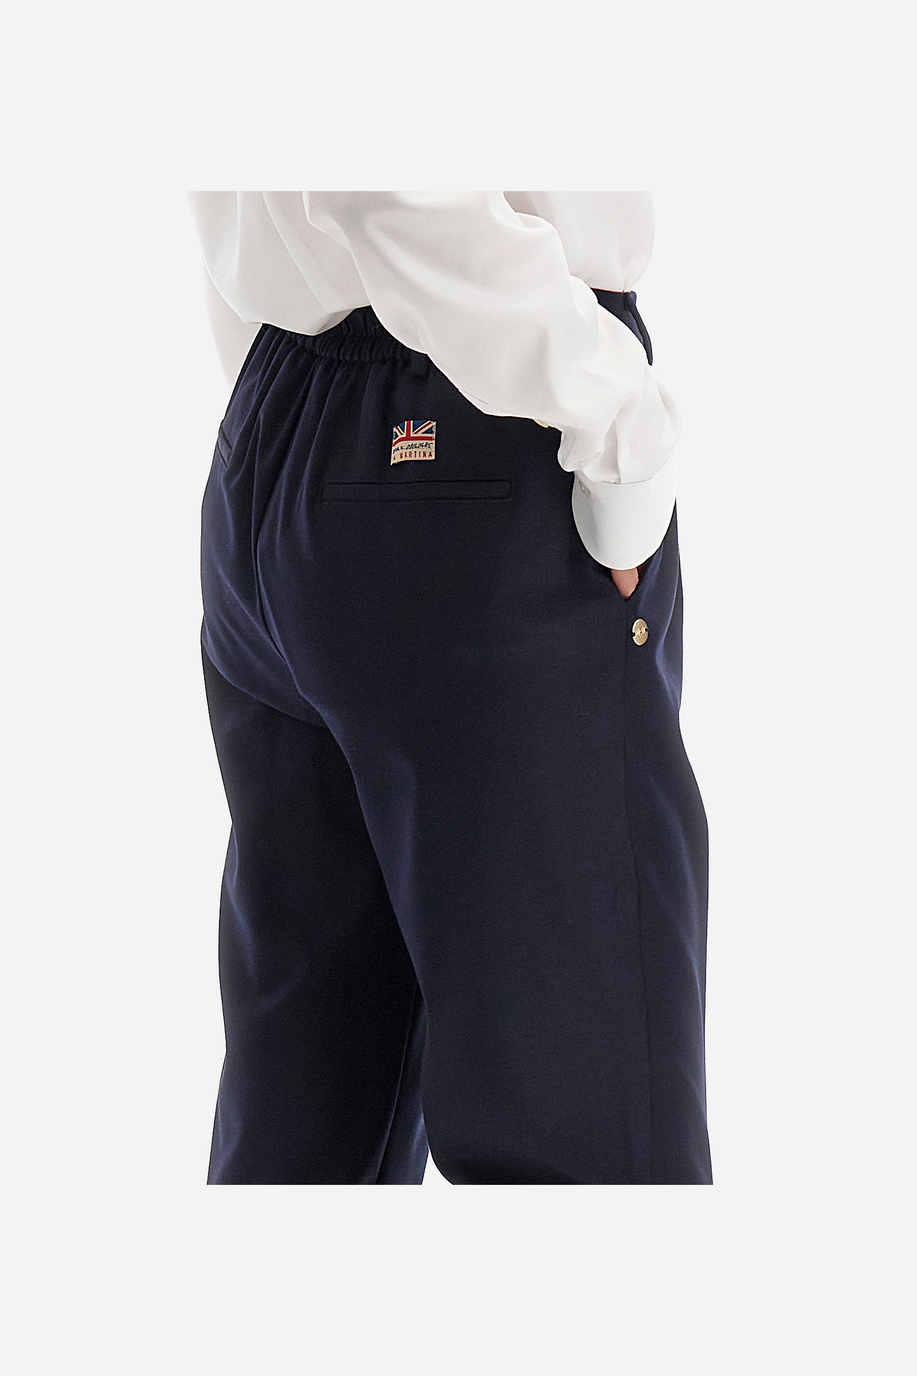 Women's trousers in a regular fit - Willena - Trousers | La Martina - Official Online Shop